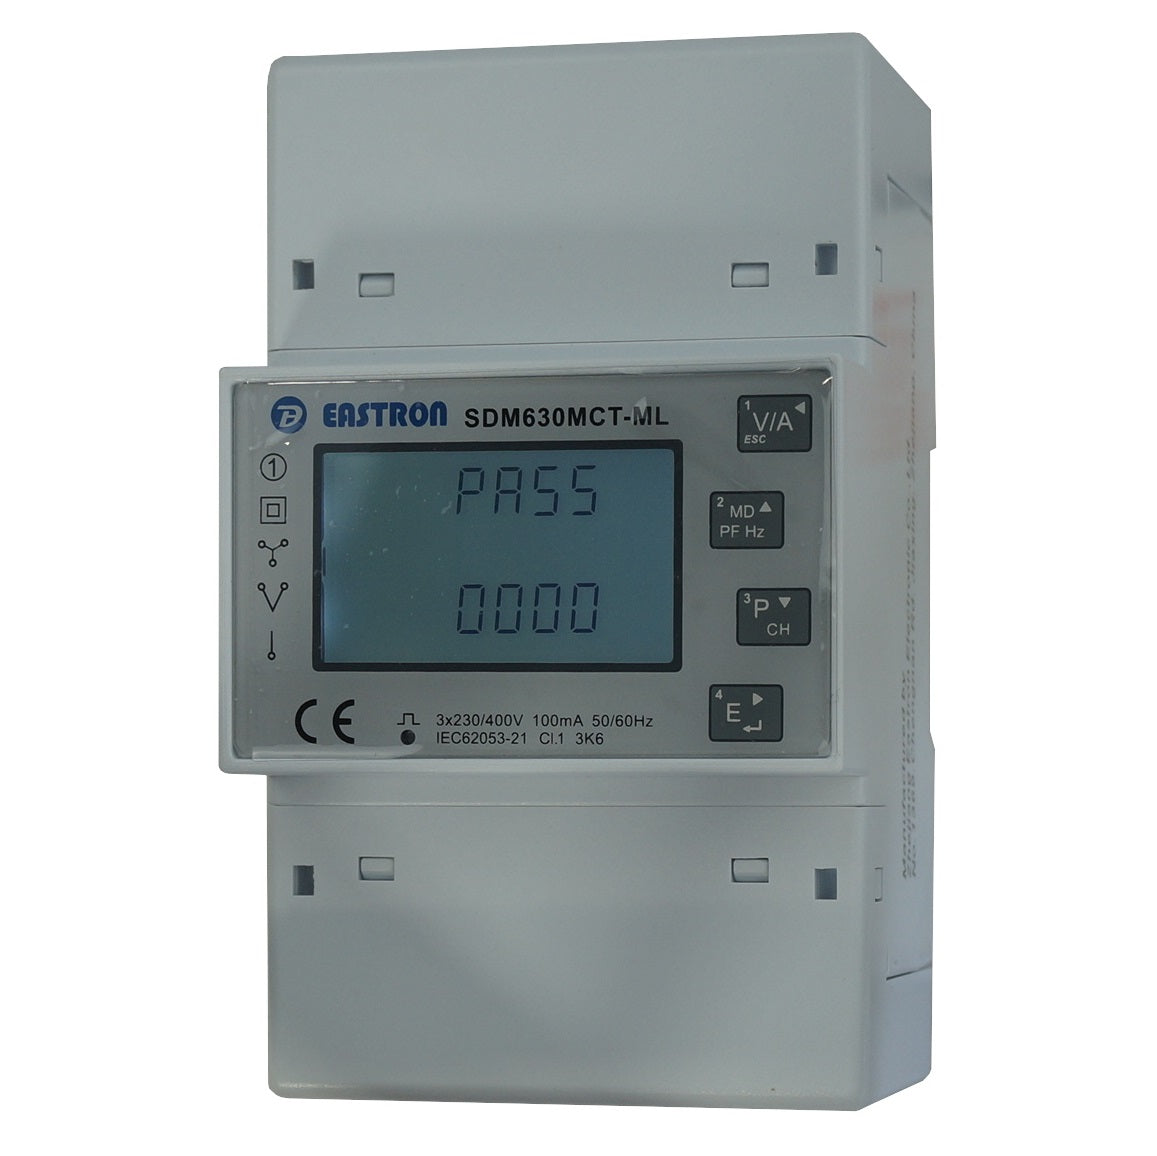 SDM630MCT-2L-MID, Dual 3 Phase DIN Rail Mount kWh Meter with Easyclick, 2 x 3 Phase or 6 x Single Phase, 240VAC aux, Class 1, 100mA RJ12 CT Connect, w/RS485 Modbus RTU Comms